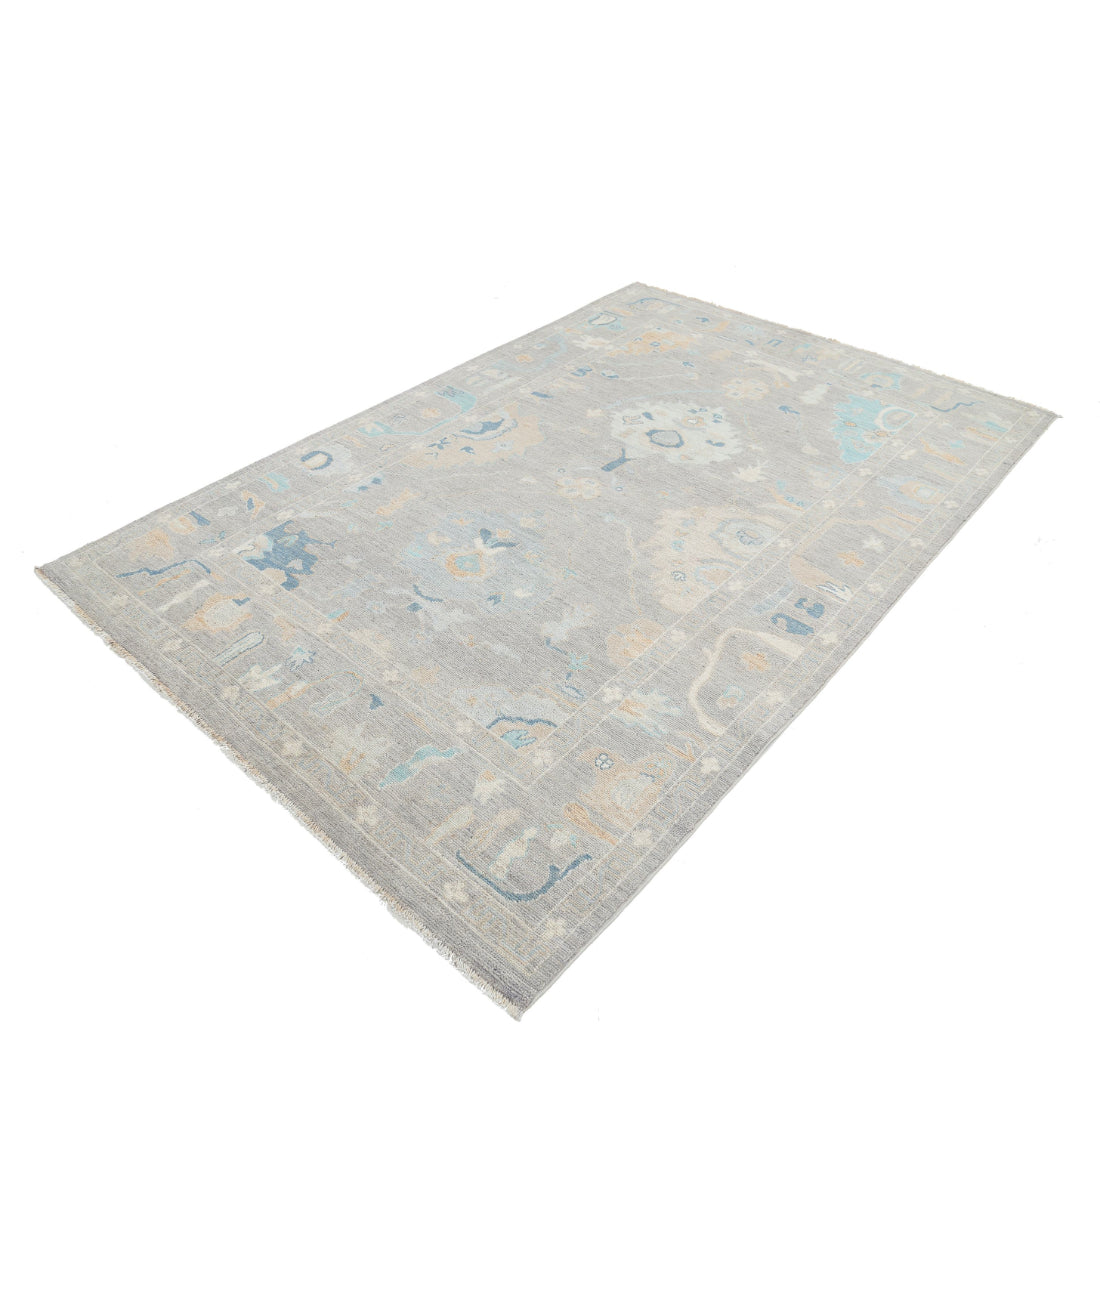 Hand Knotted Oushak Wool Rug - 5'11'' x 8'1'' 5'11'' x 8'1'' (178 X 243) / Brown / Grey